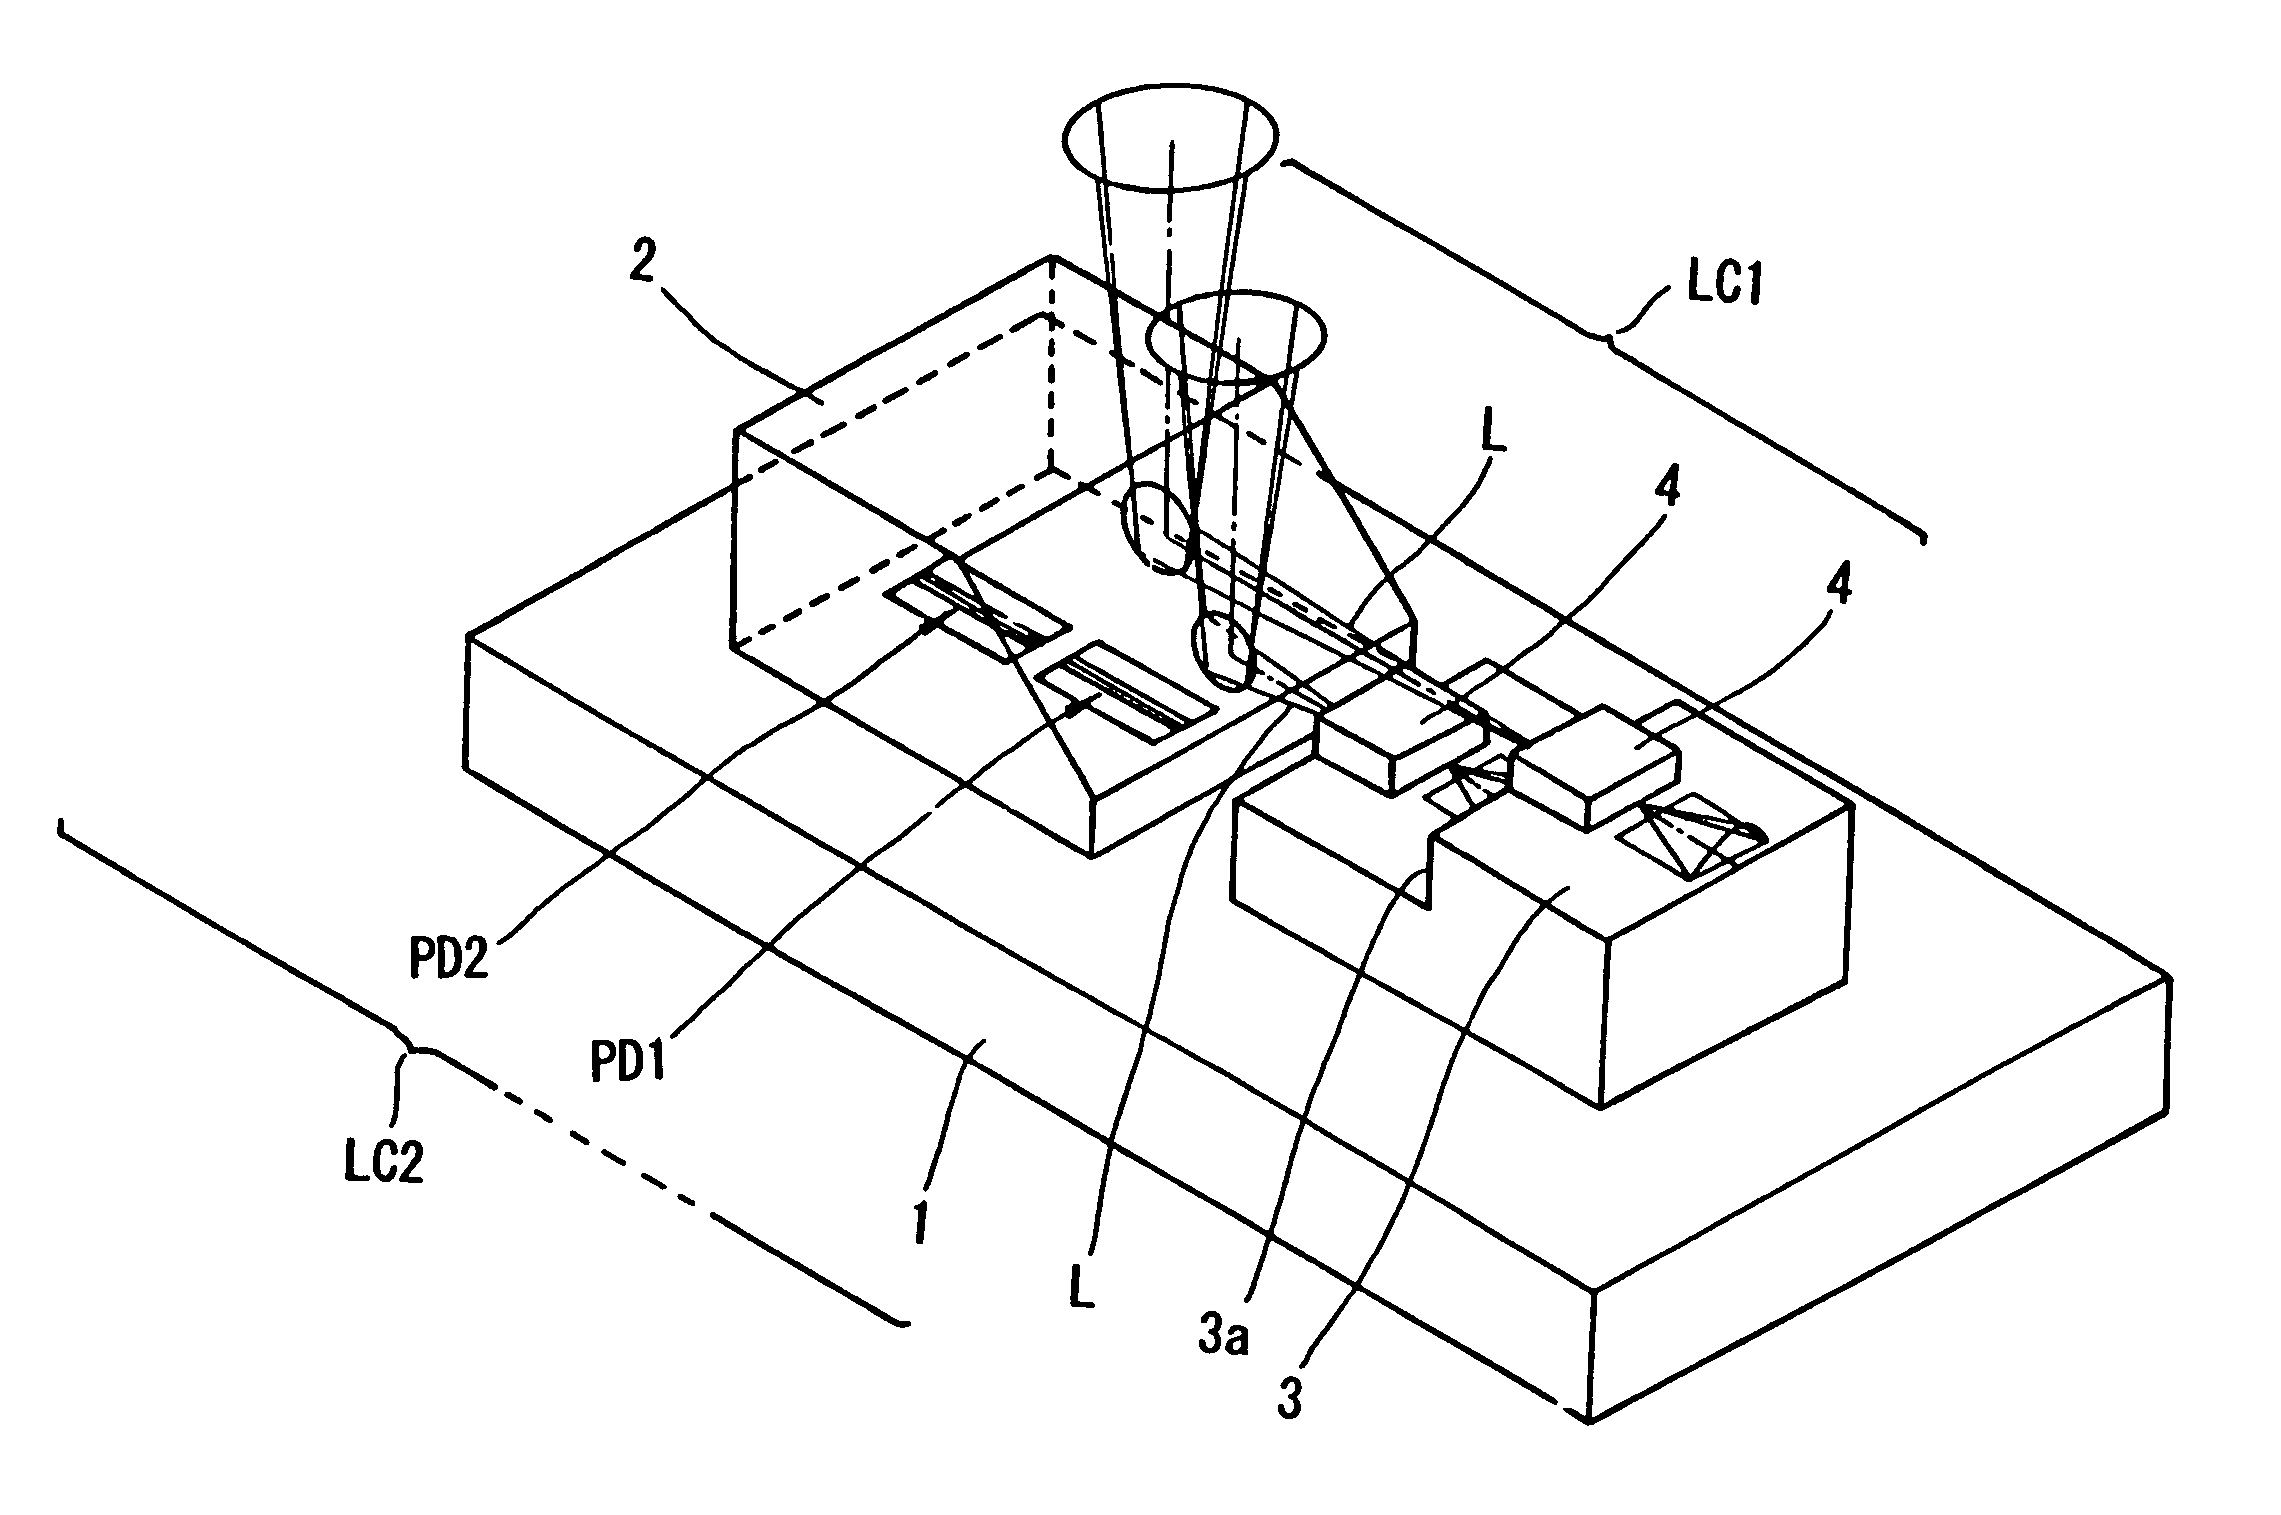 Optical pickup device with a plurality of laser couplers